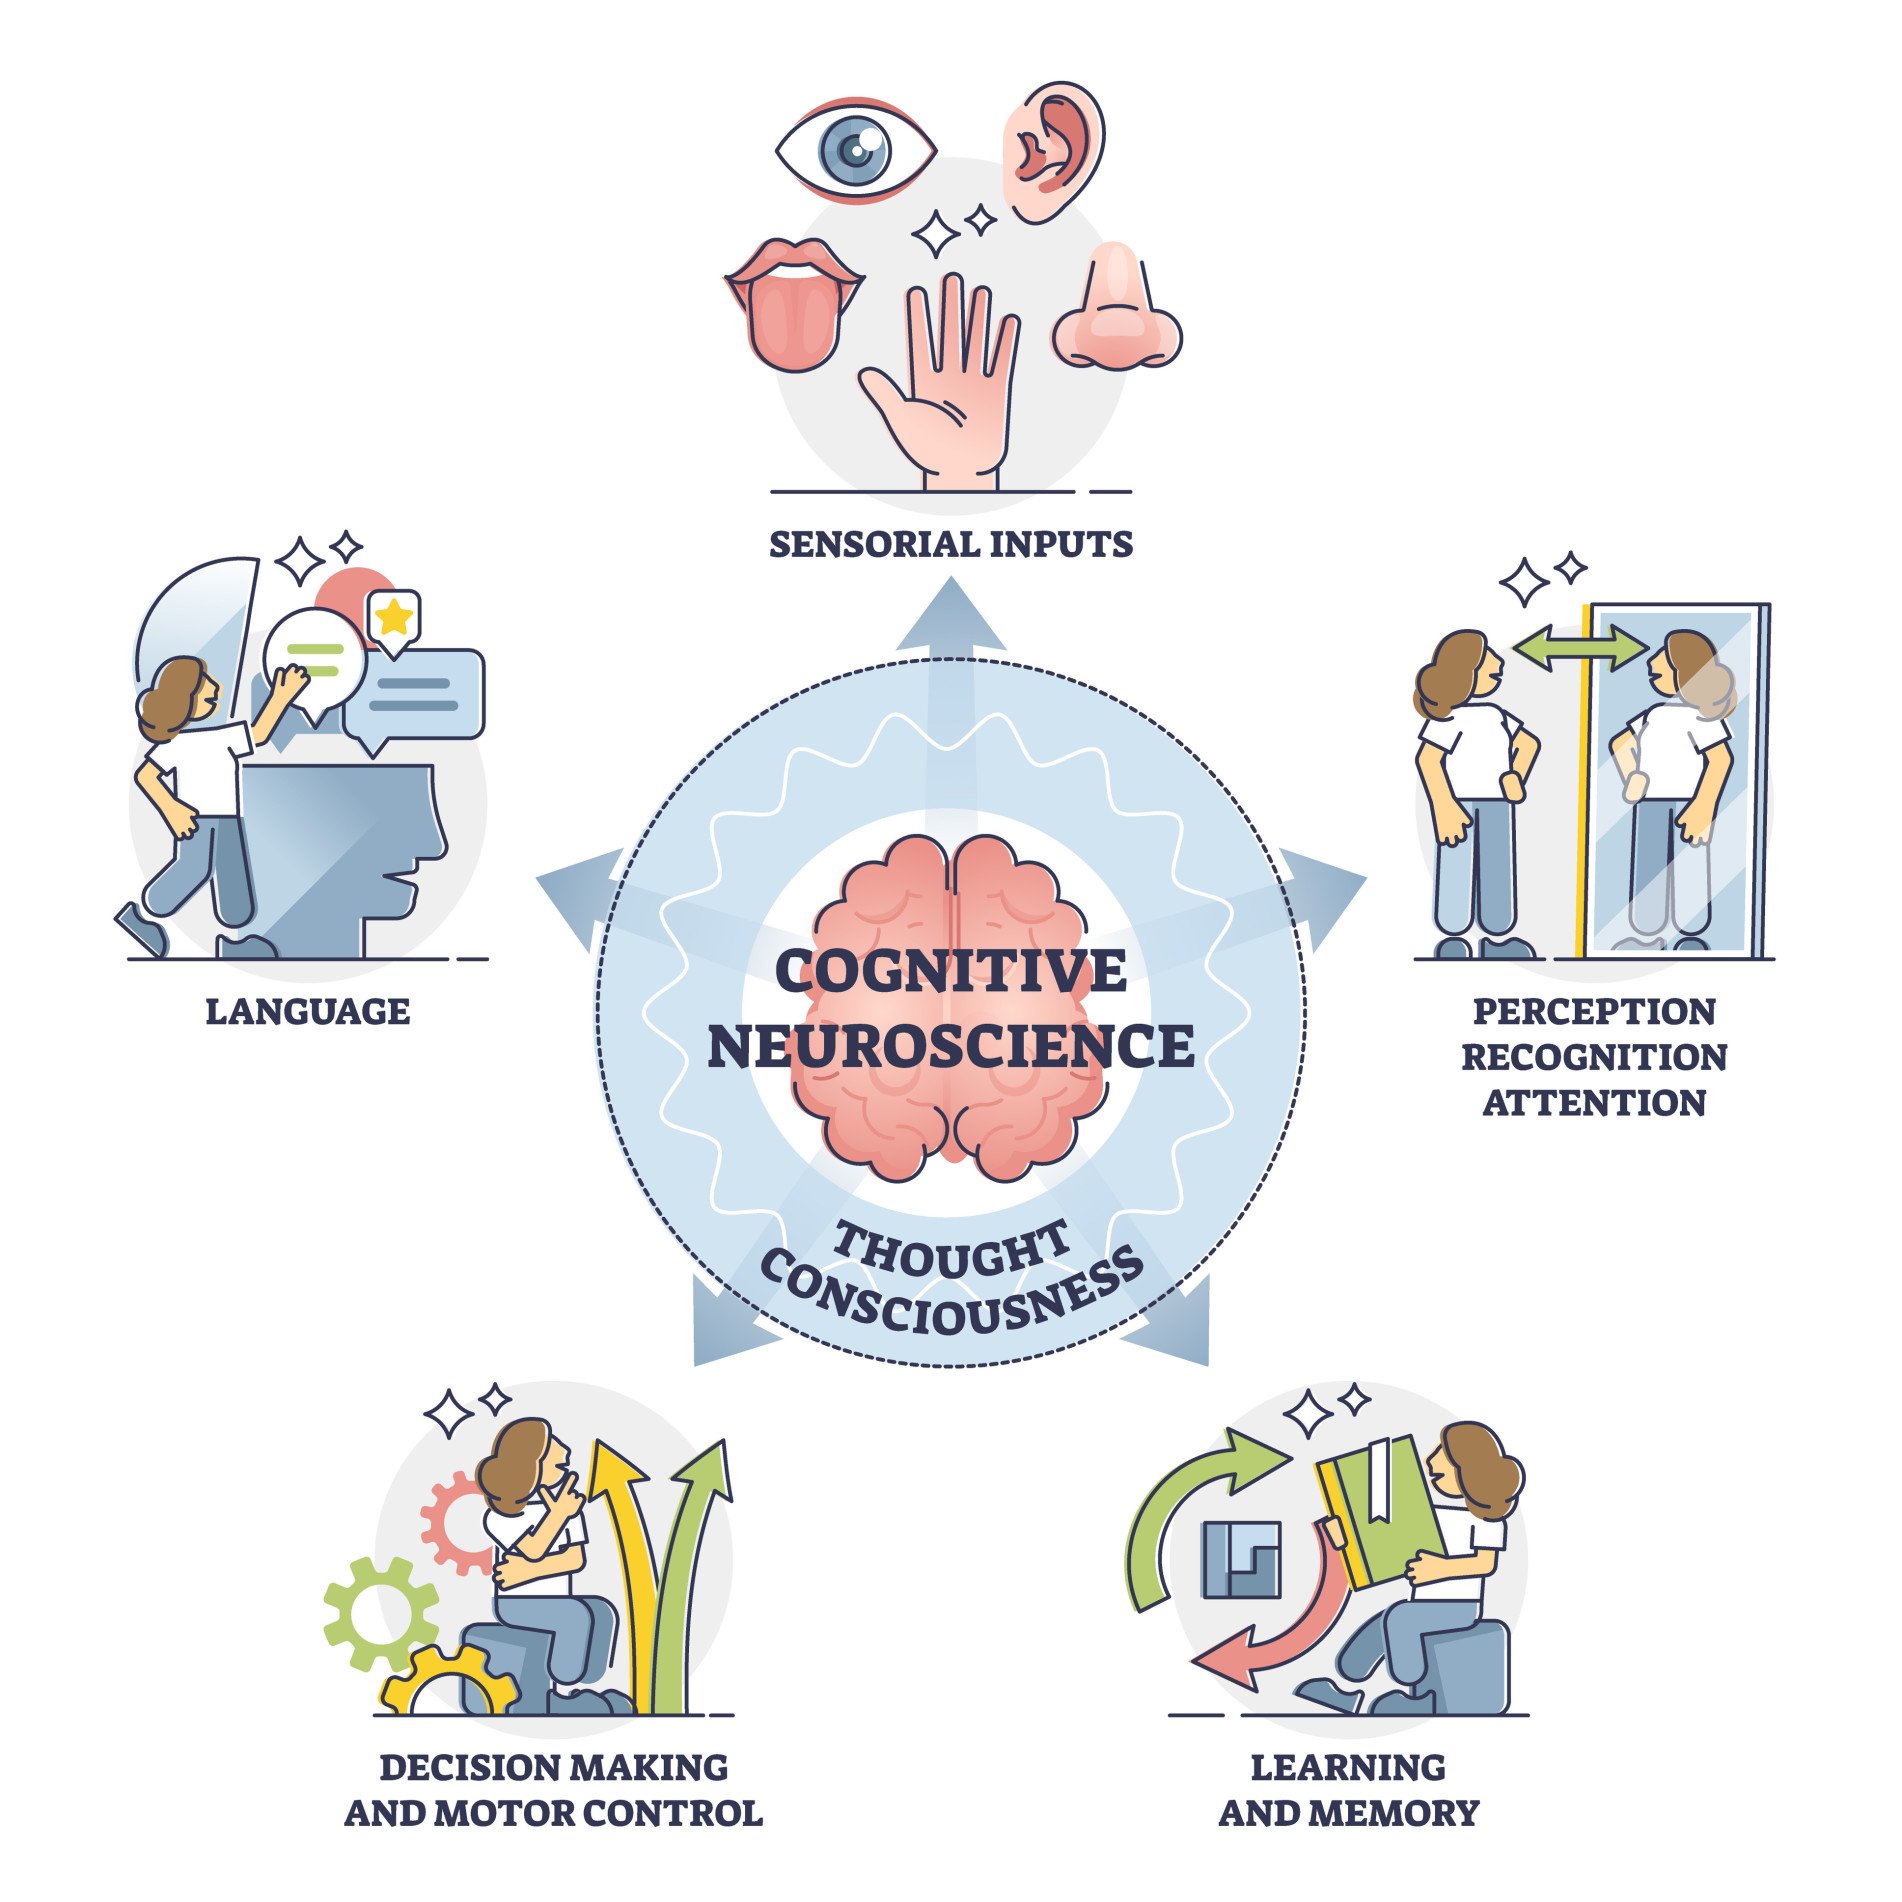 Cognitive neuroscience and thought consciousness processes, outline diagram. Sensory input, language, decision making and motor control, learning and memory, self perception, recognition and attention